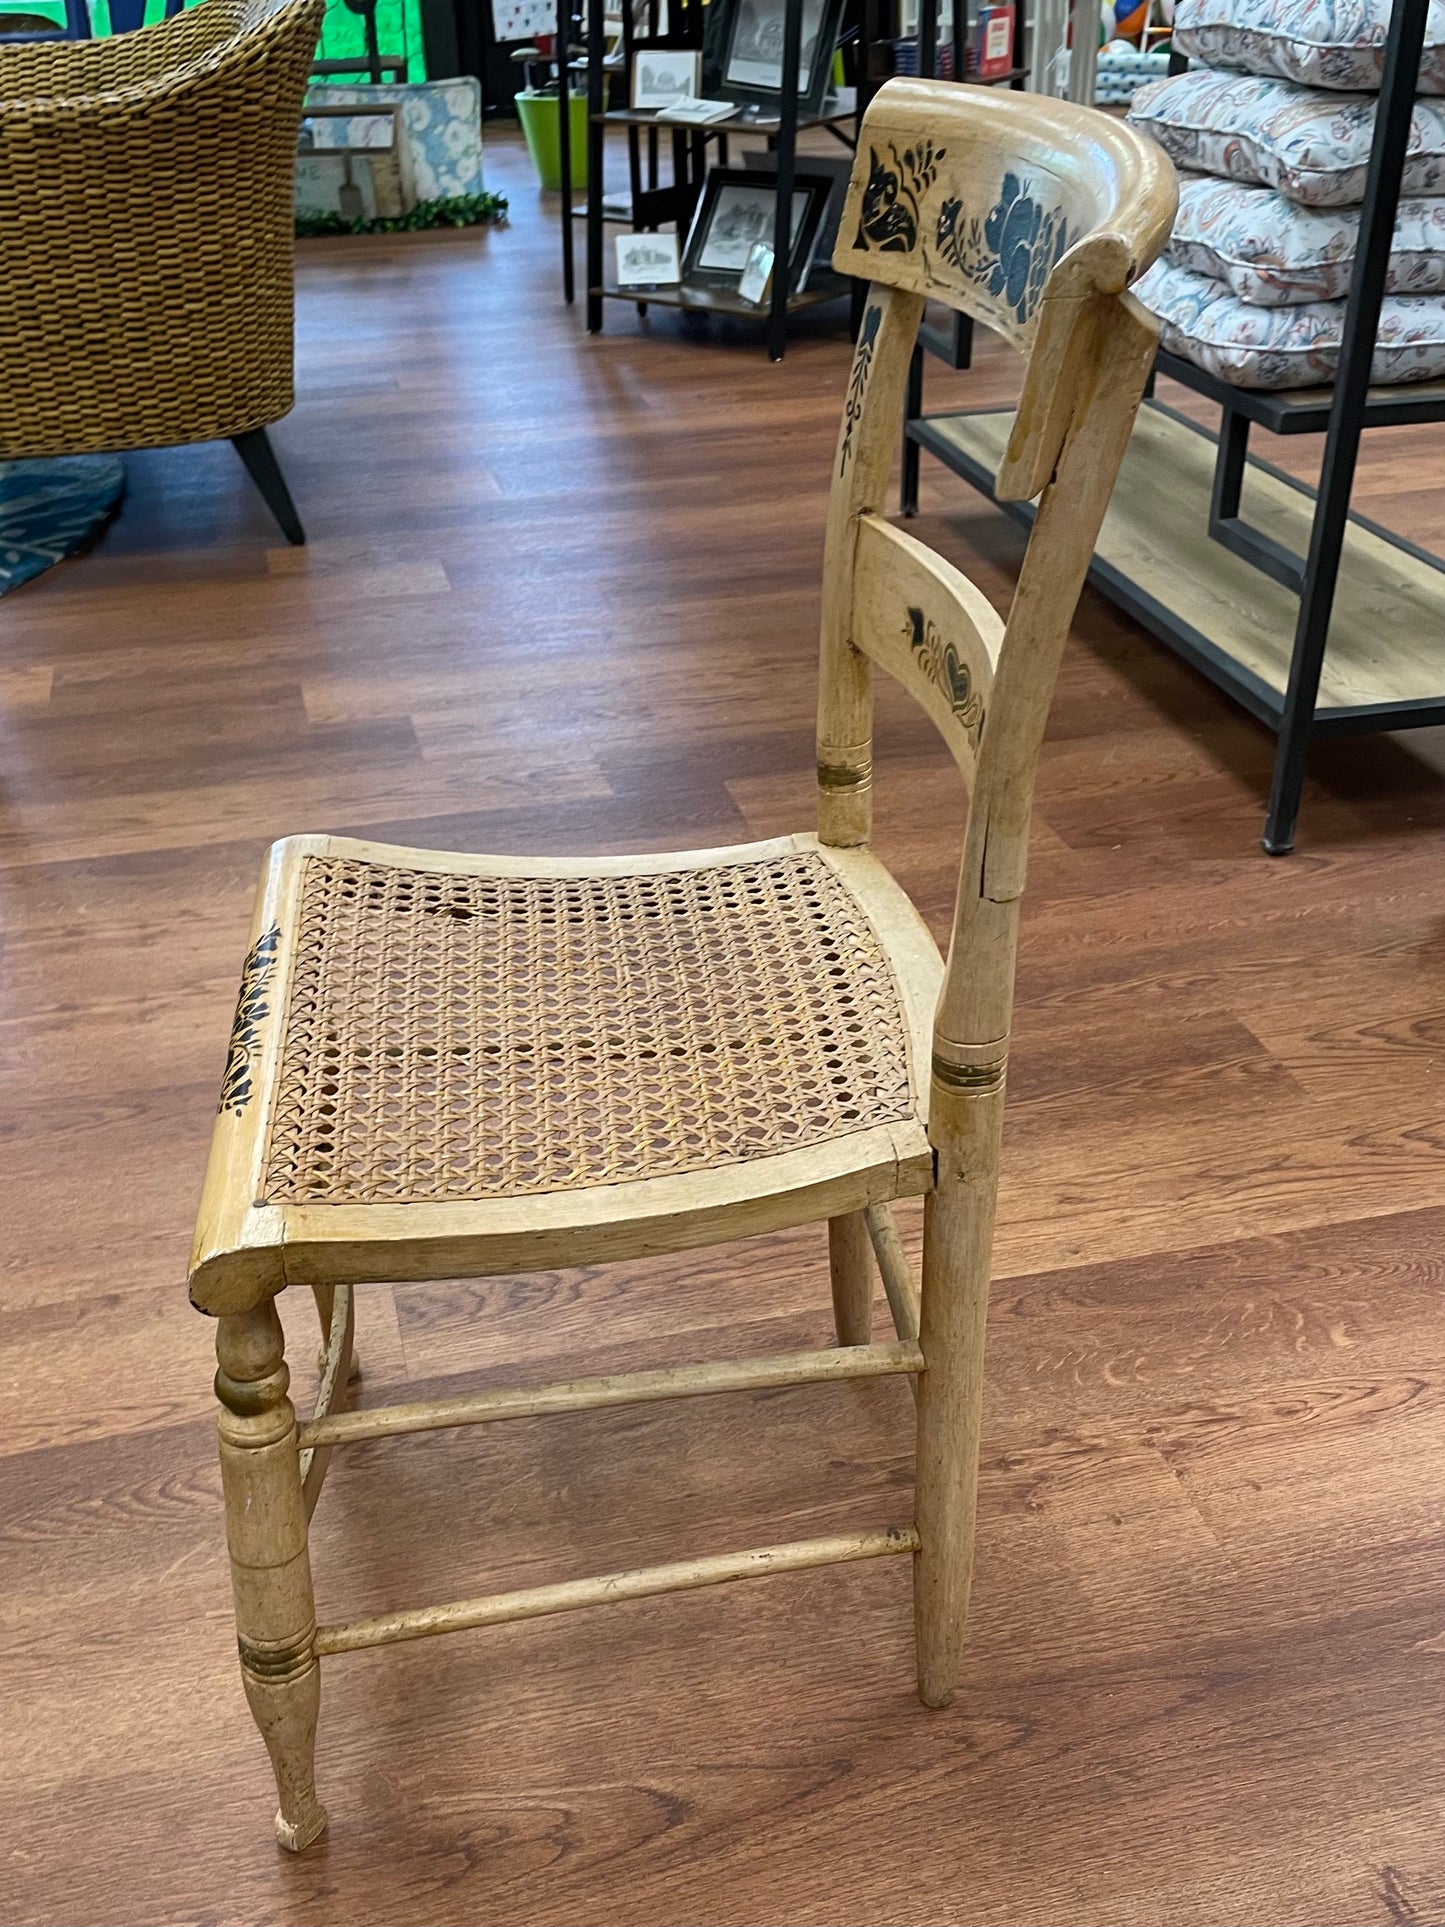 Set of 4 Wooden Bird/Cane Chairs